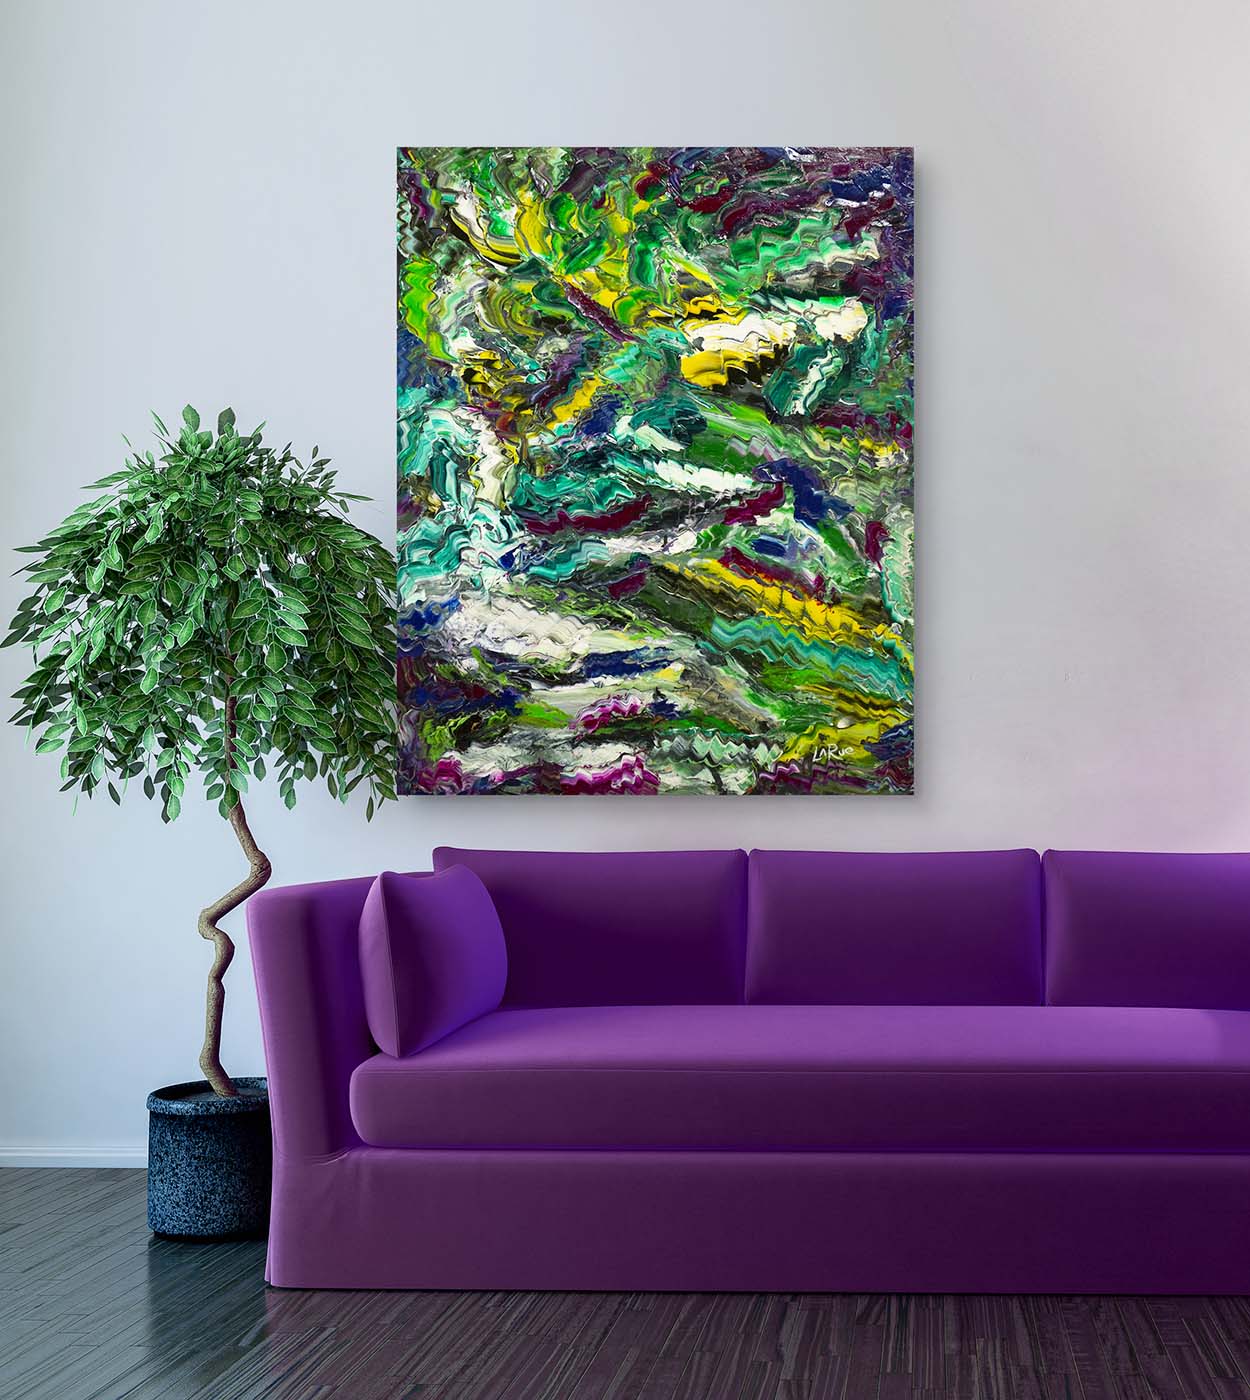 Grasshopper Abstract art by Doug LaRue on a living room wall over a purple couch